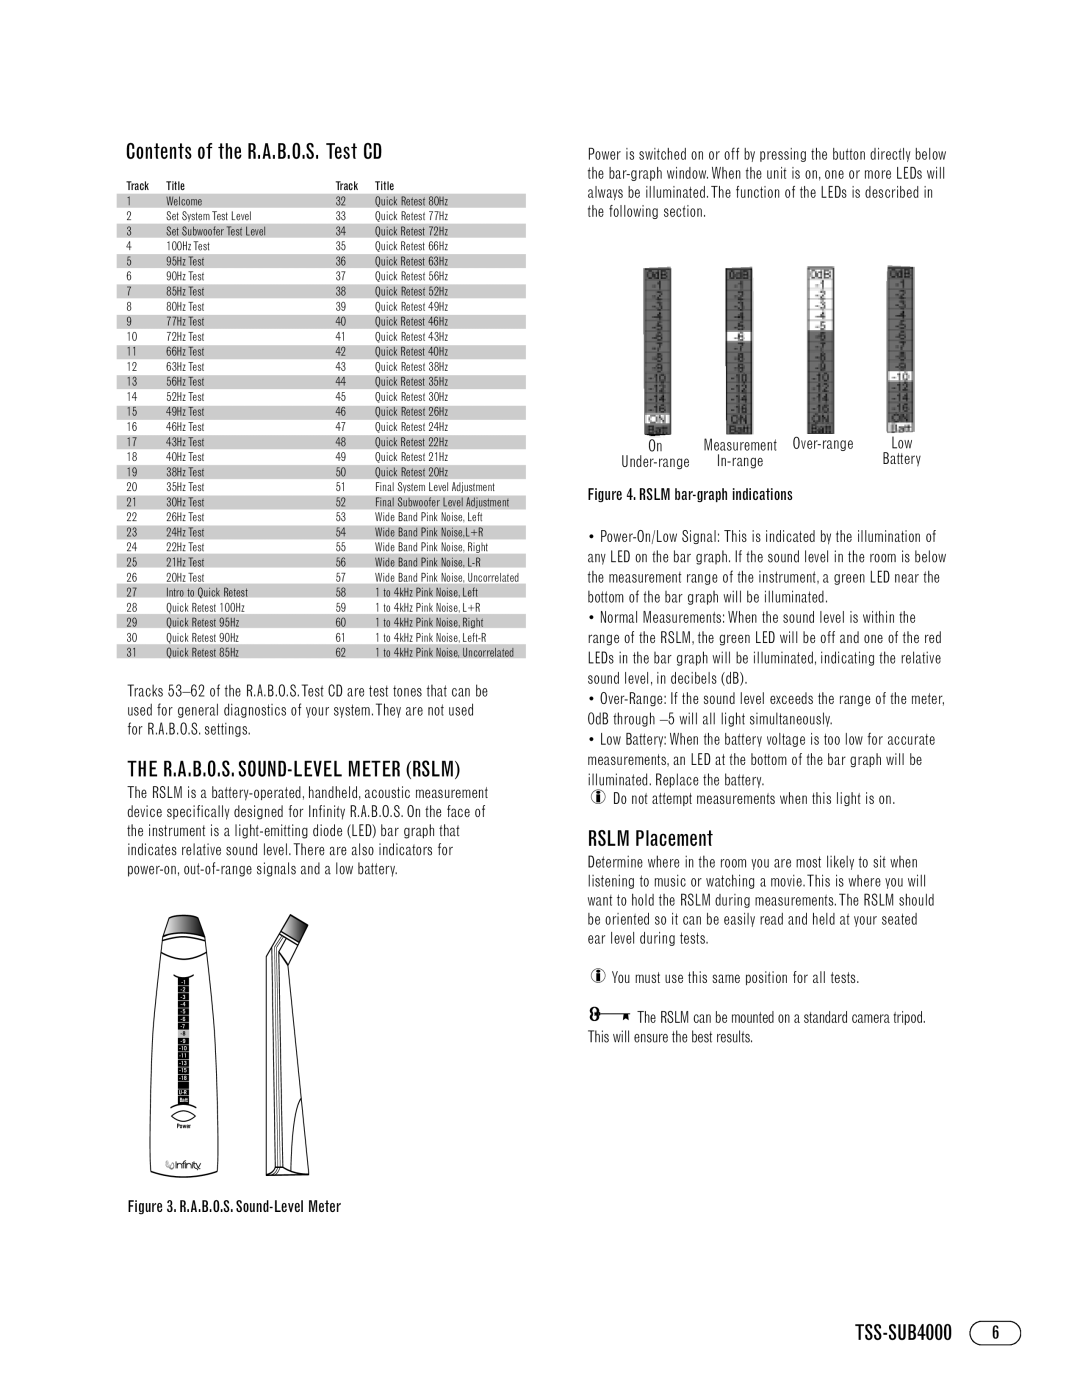 Infinity TSS-SUB4000 manual Contents of the R.A.B.O.S. Test CD, The R.A.B.O.S. Sound-Levelmeter Rslm, RSLM Placement 